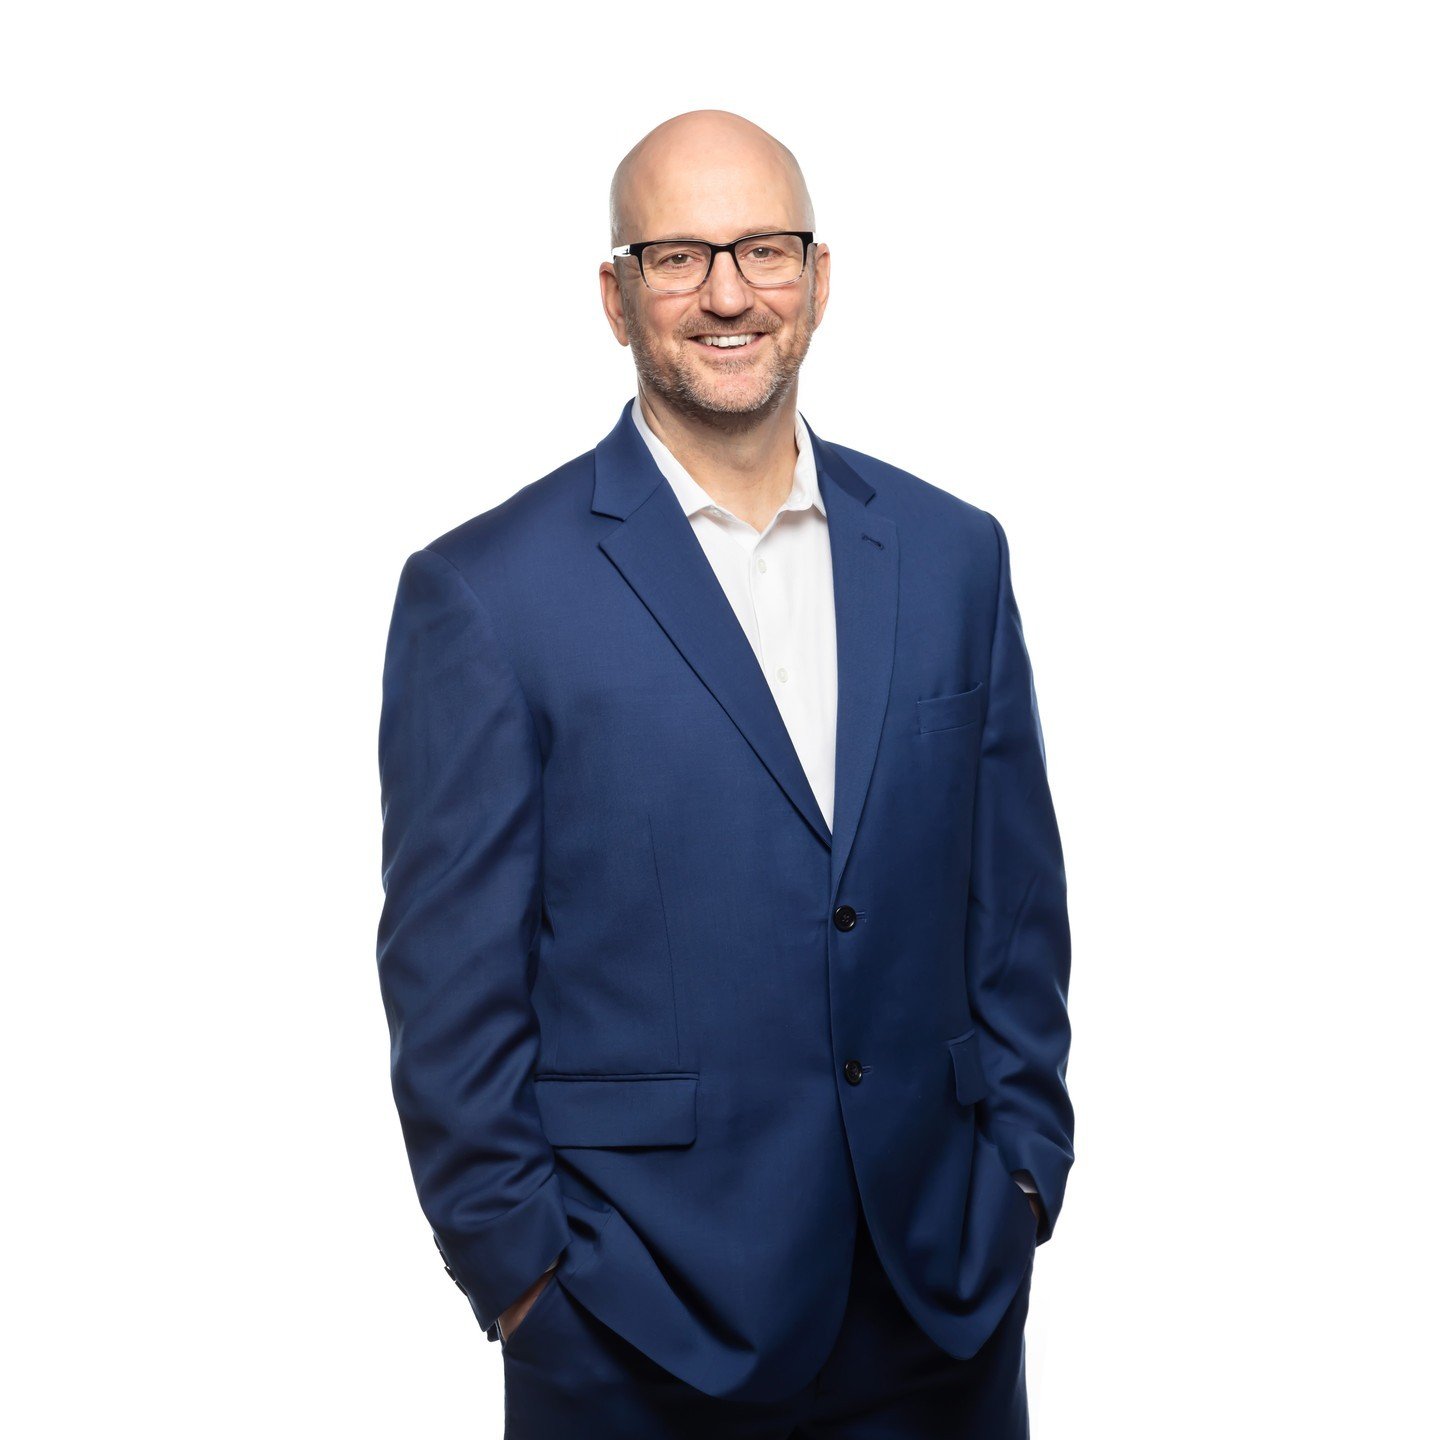 Meet the team! 👥 First up: 

Andrew Perkins - REALTORⓇ
Team Lead at Andrew Perkins Real Estate &amp; Founder of @halifaxcondos.co 

Andrew is a seasoned real estate professional with close to 20 years of experience in the industry; Andrew understand